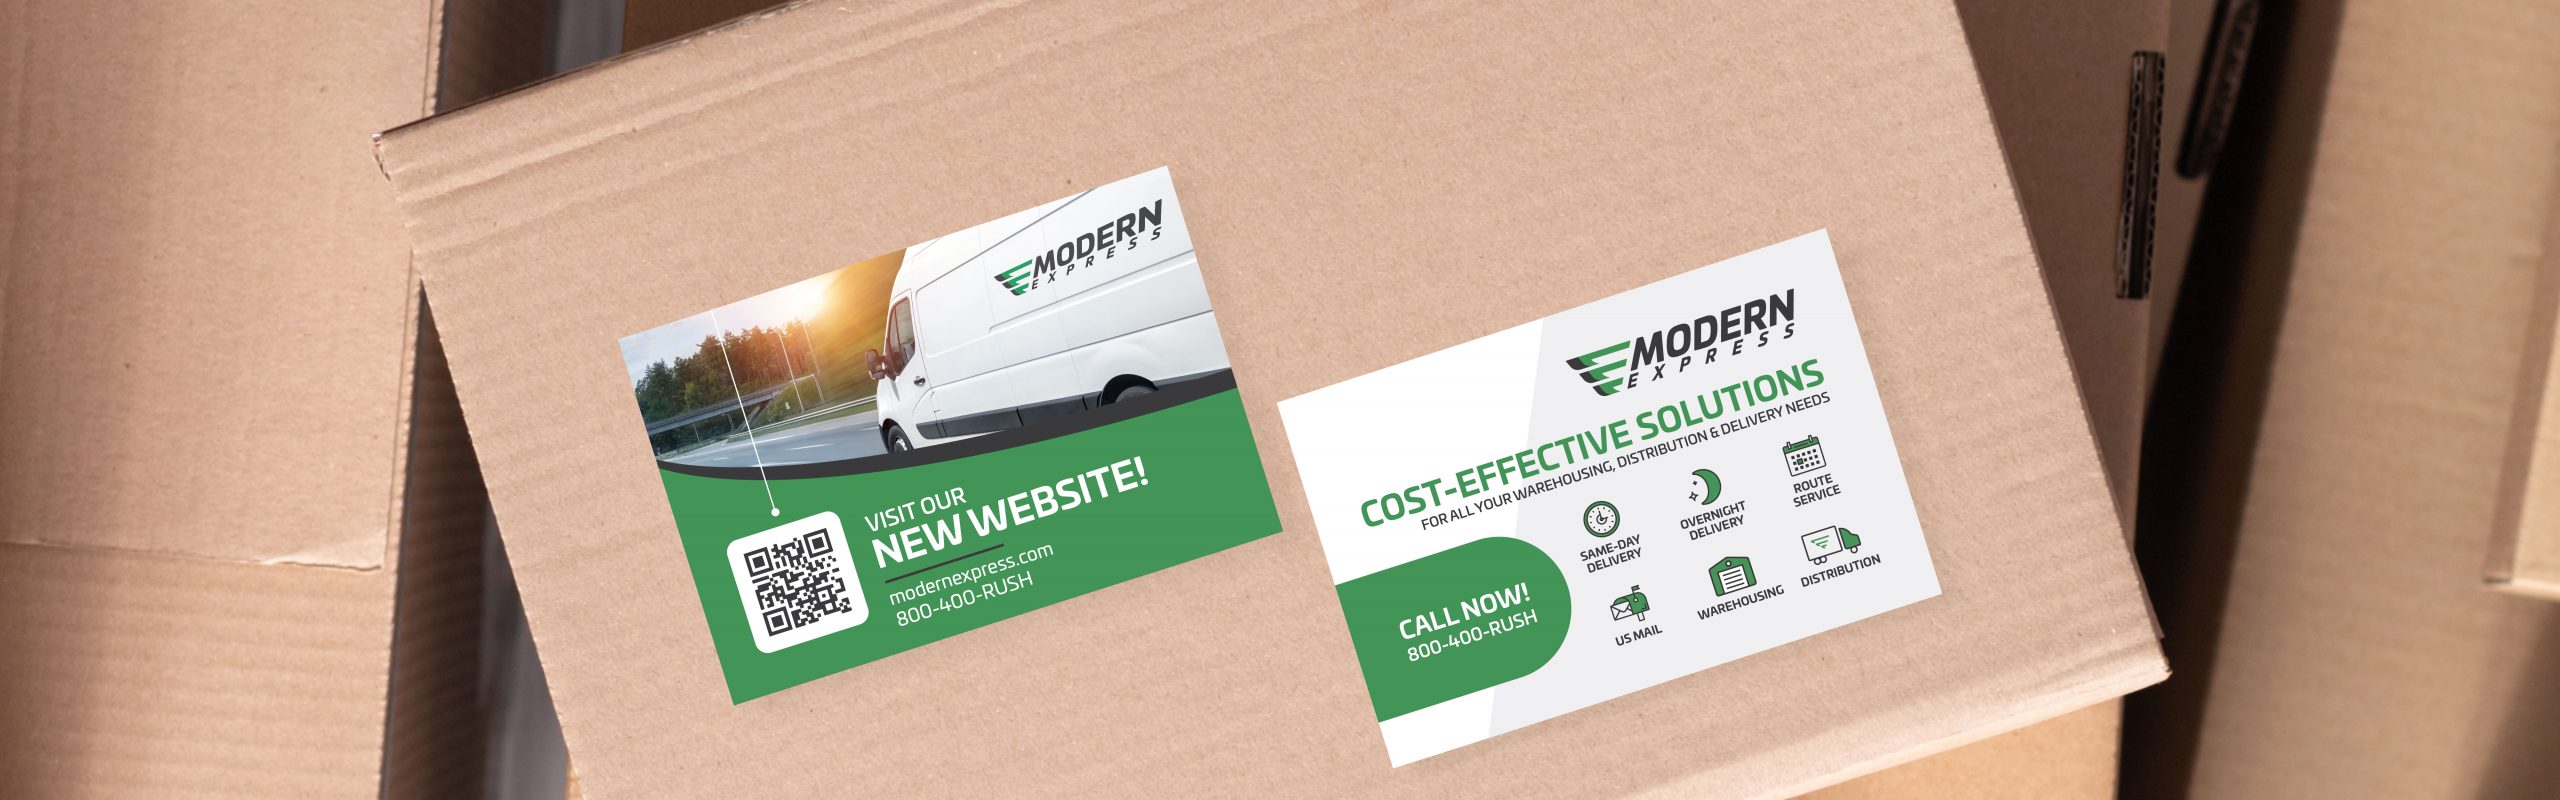 Two cardboard boxes with printed promotional flyers on top showcasing advertisements for Modern Express's new website and cost-effective solutions.